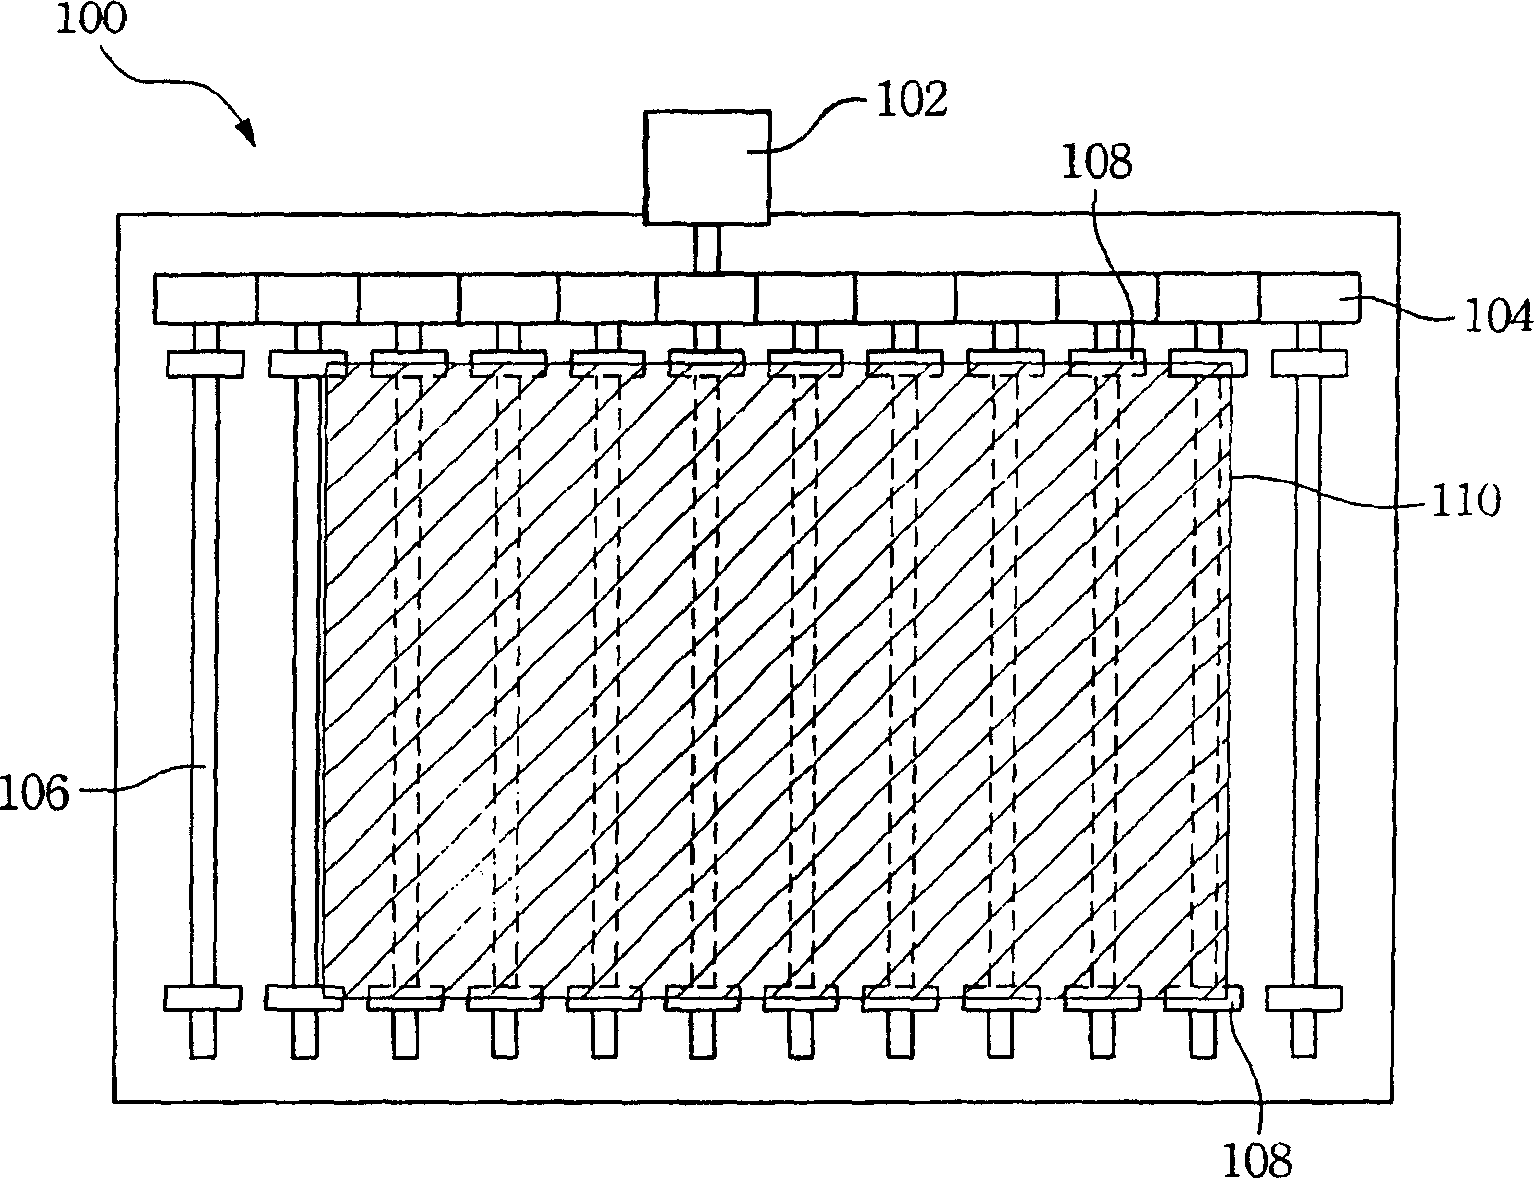 Substrate carrying device